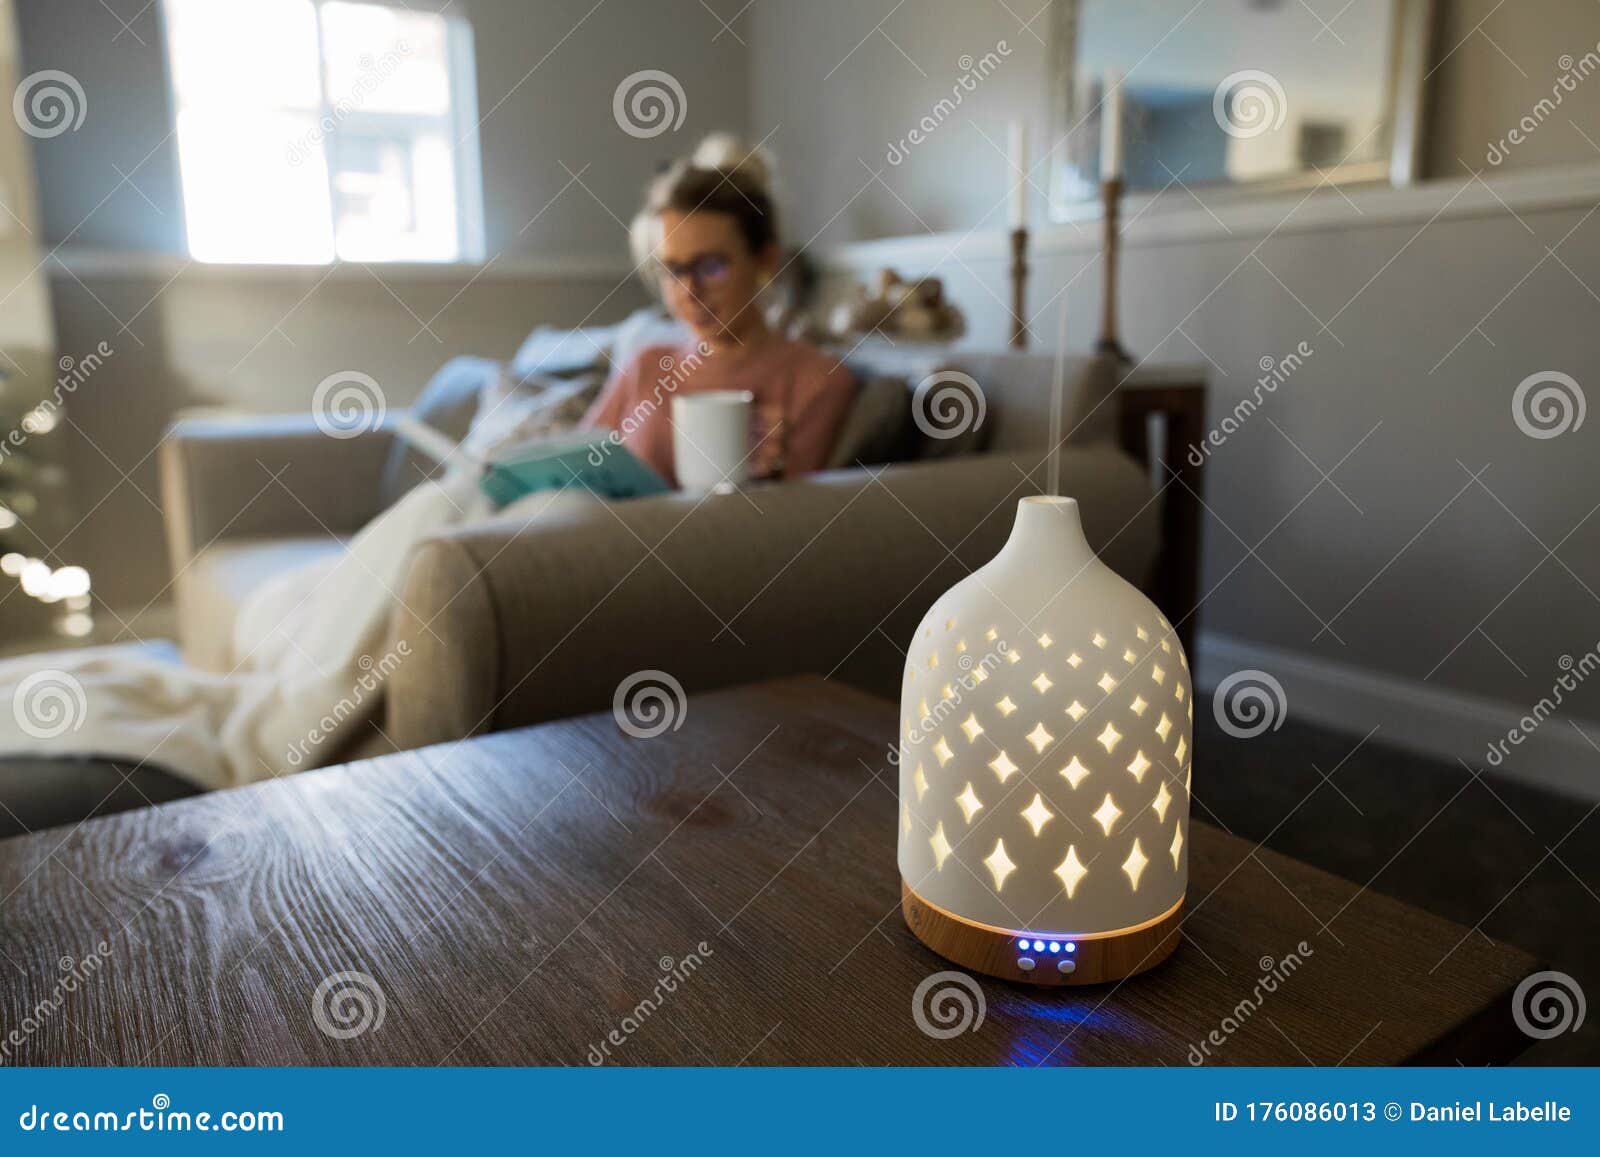 essential oil diffuser with a young woman relaxing in the background